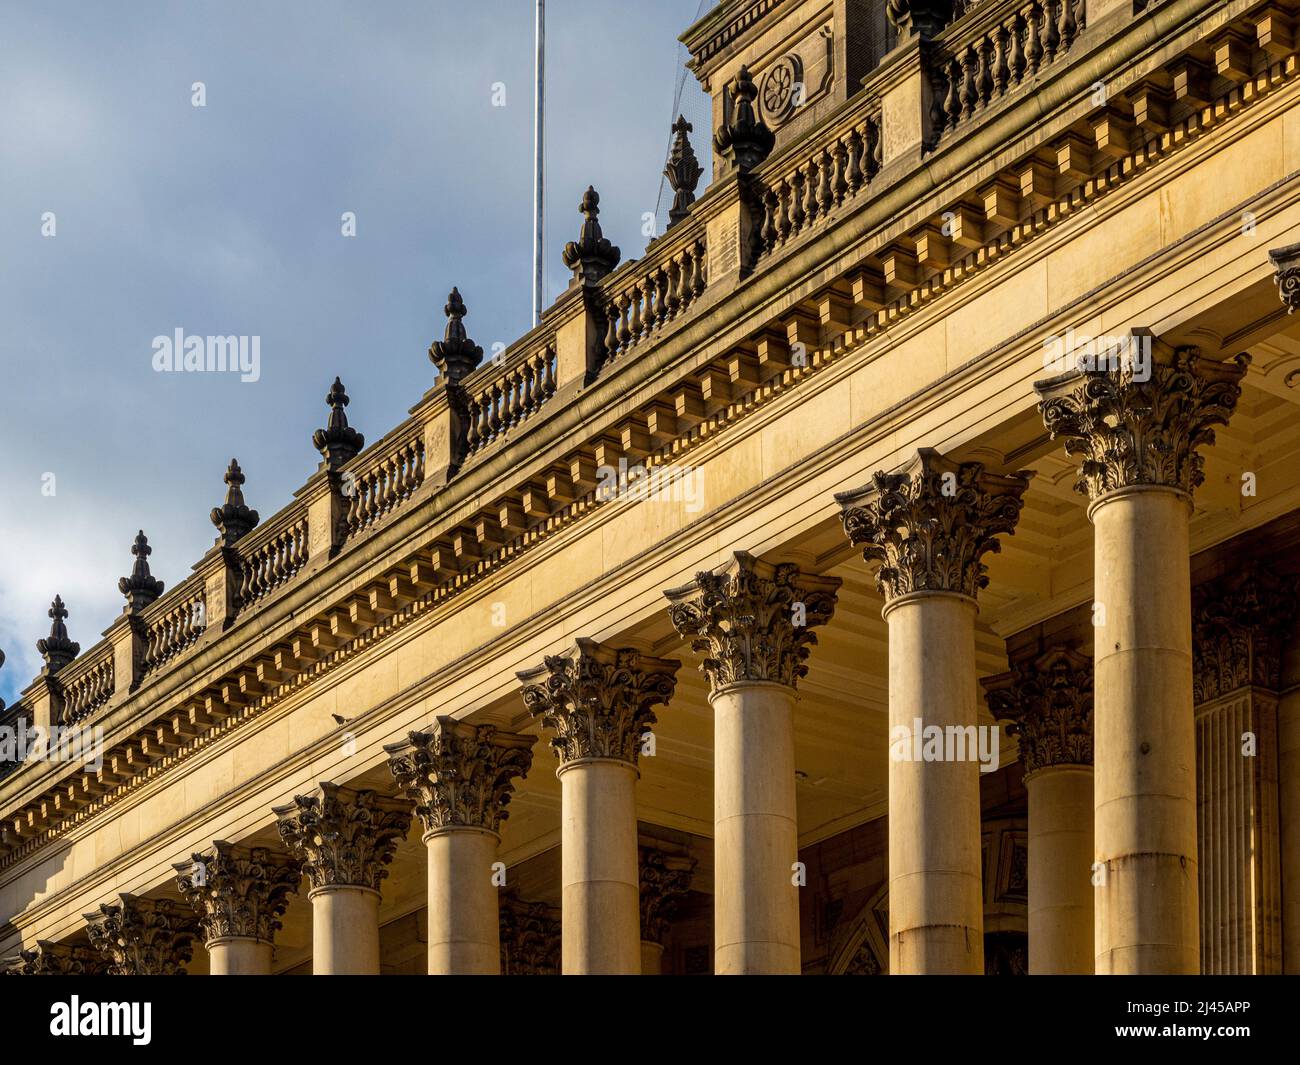 Closeup of the ornate carved stone capitals and cornice of Leeds Town Hall, seen agains a blue sky. Leeds, West Yorkshire, UK Stock Photo